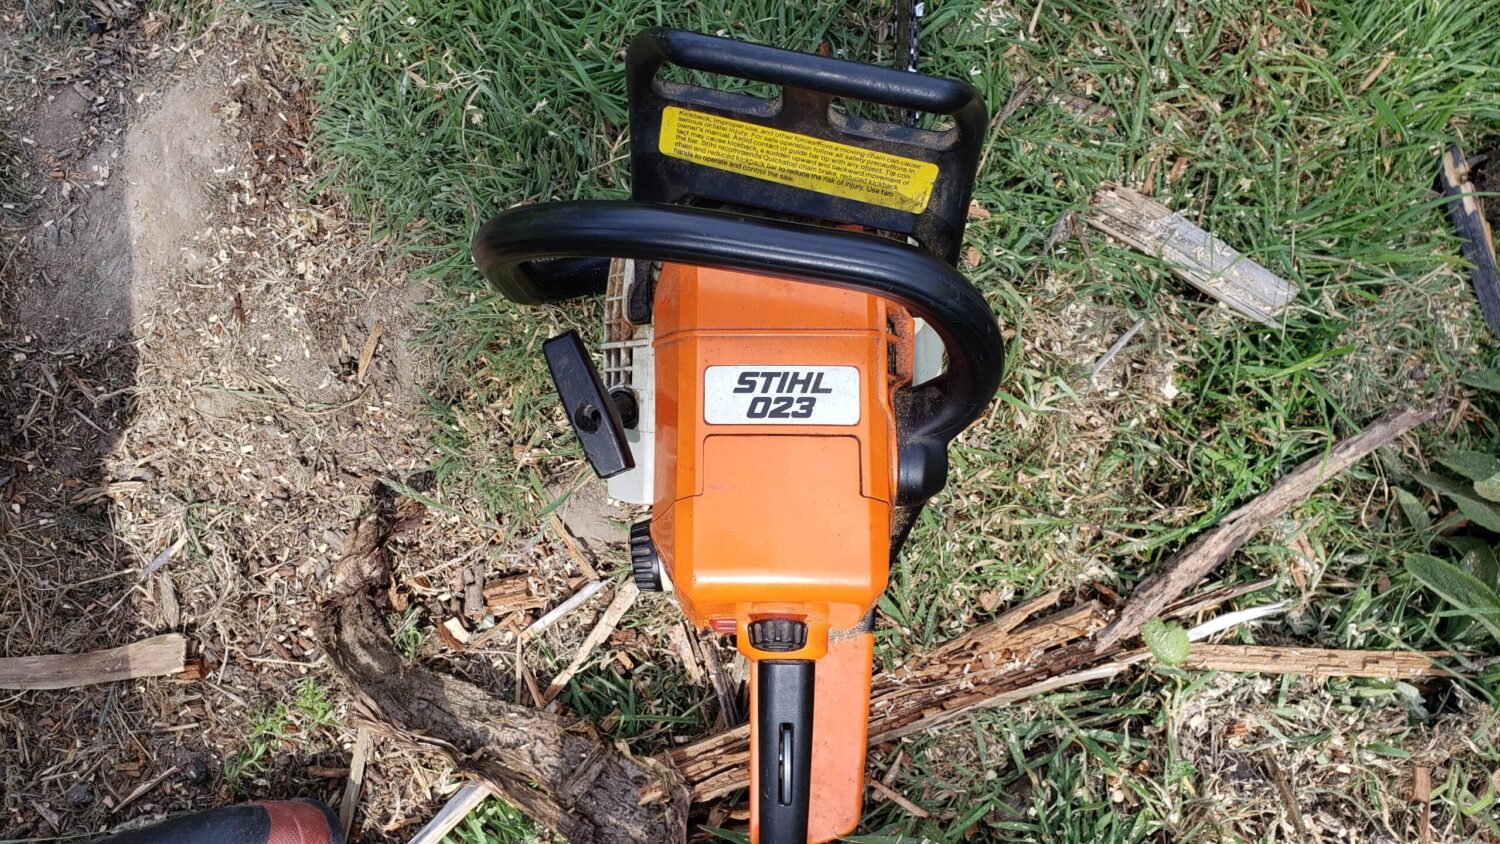 stihl 023 chainsaw review